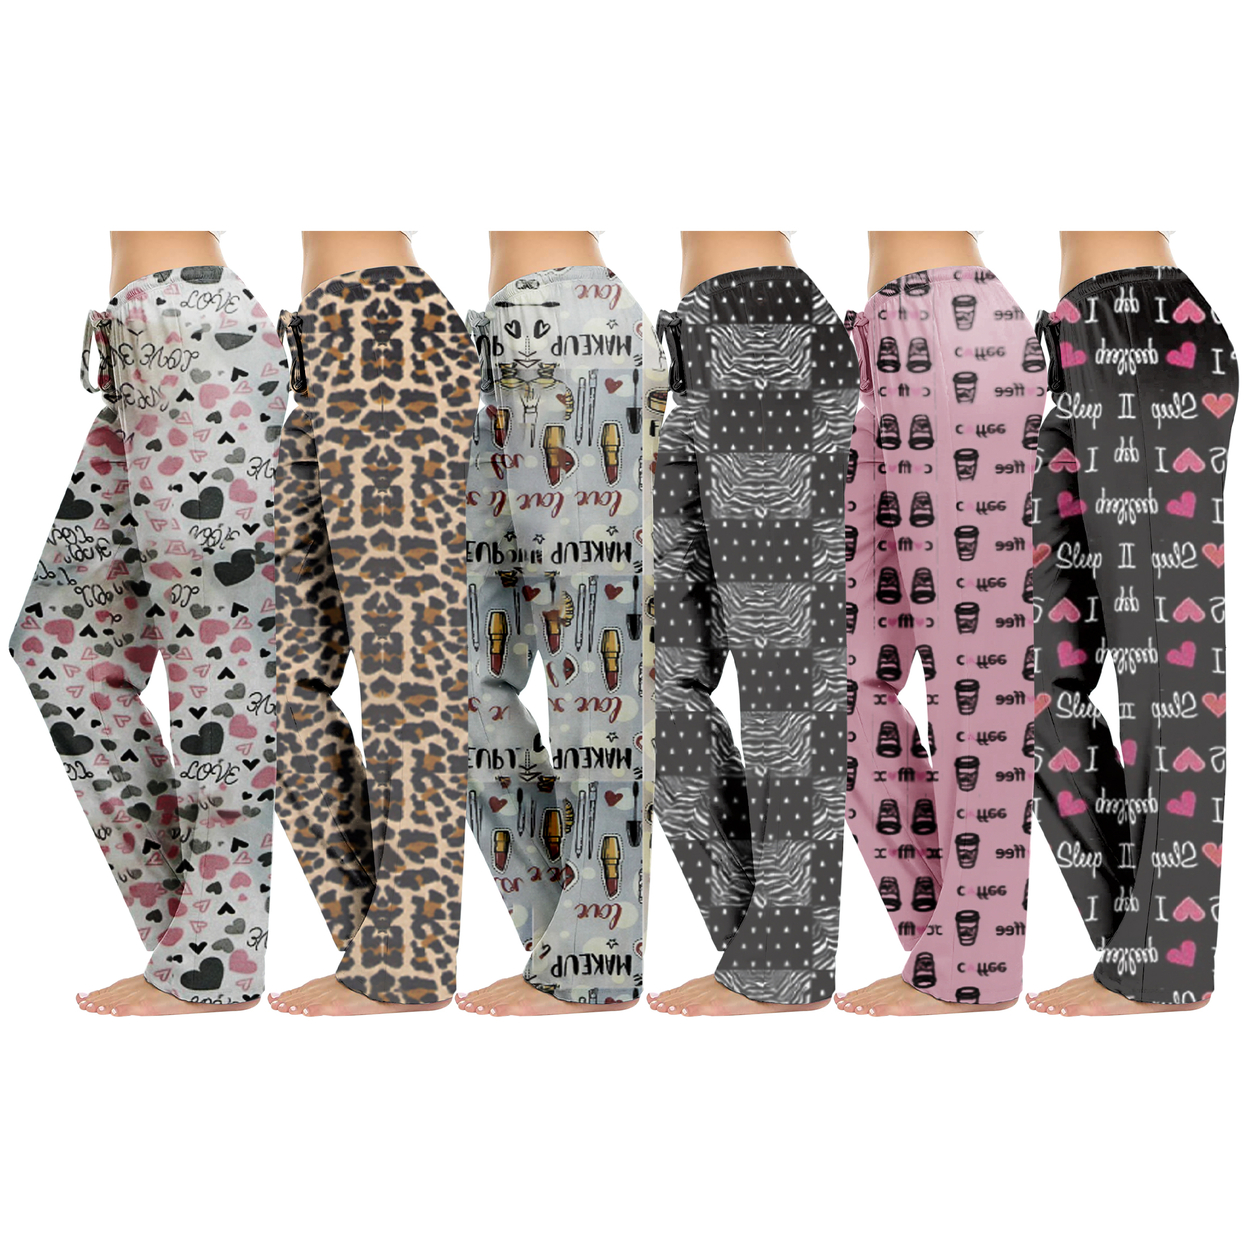 3-Pack: Women's Casual Fun Printed Lightweight Lounge Terry Knit Pajama Bottom Pants - Small, Love